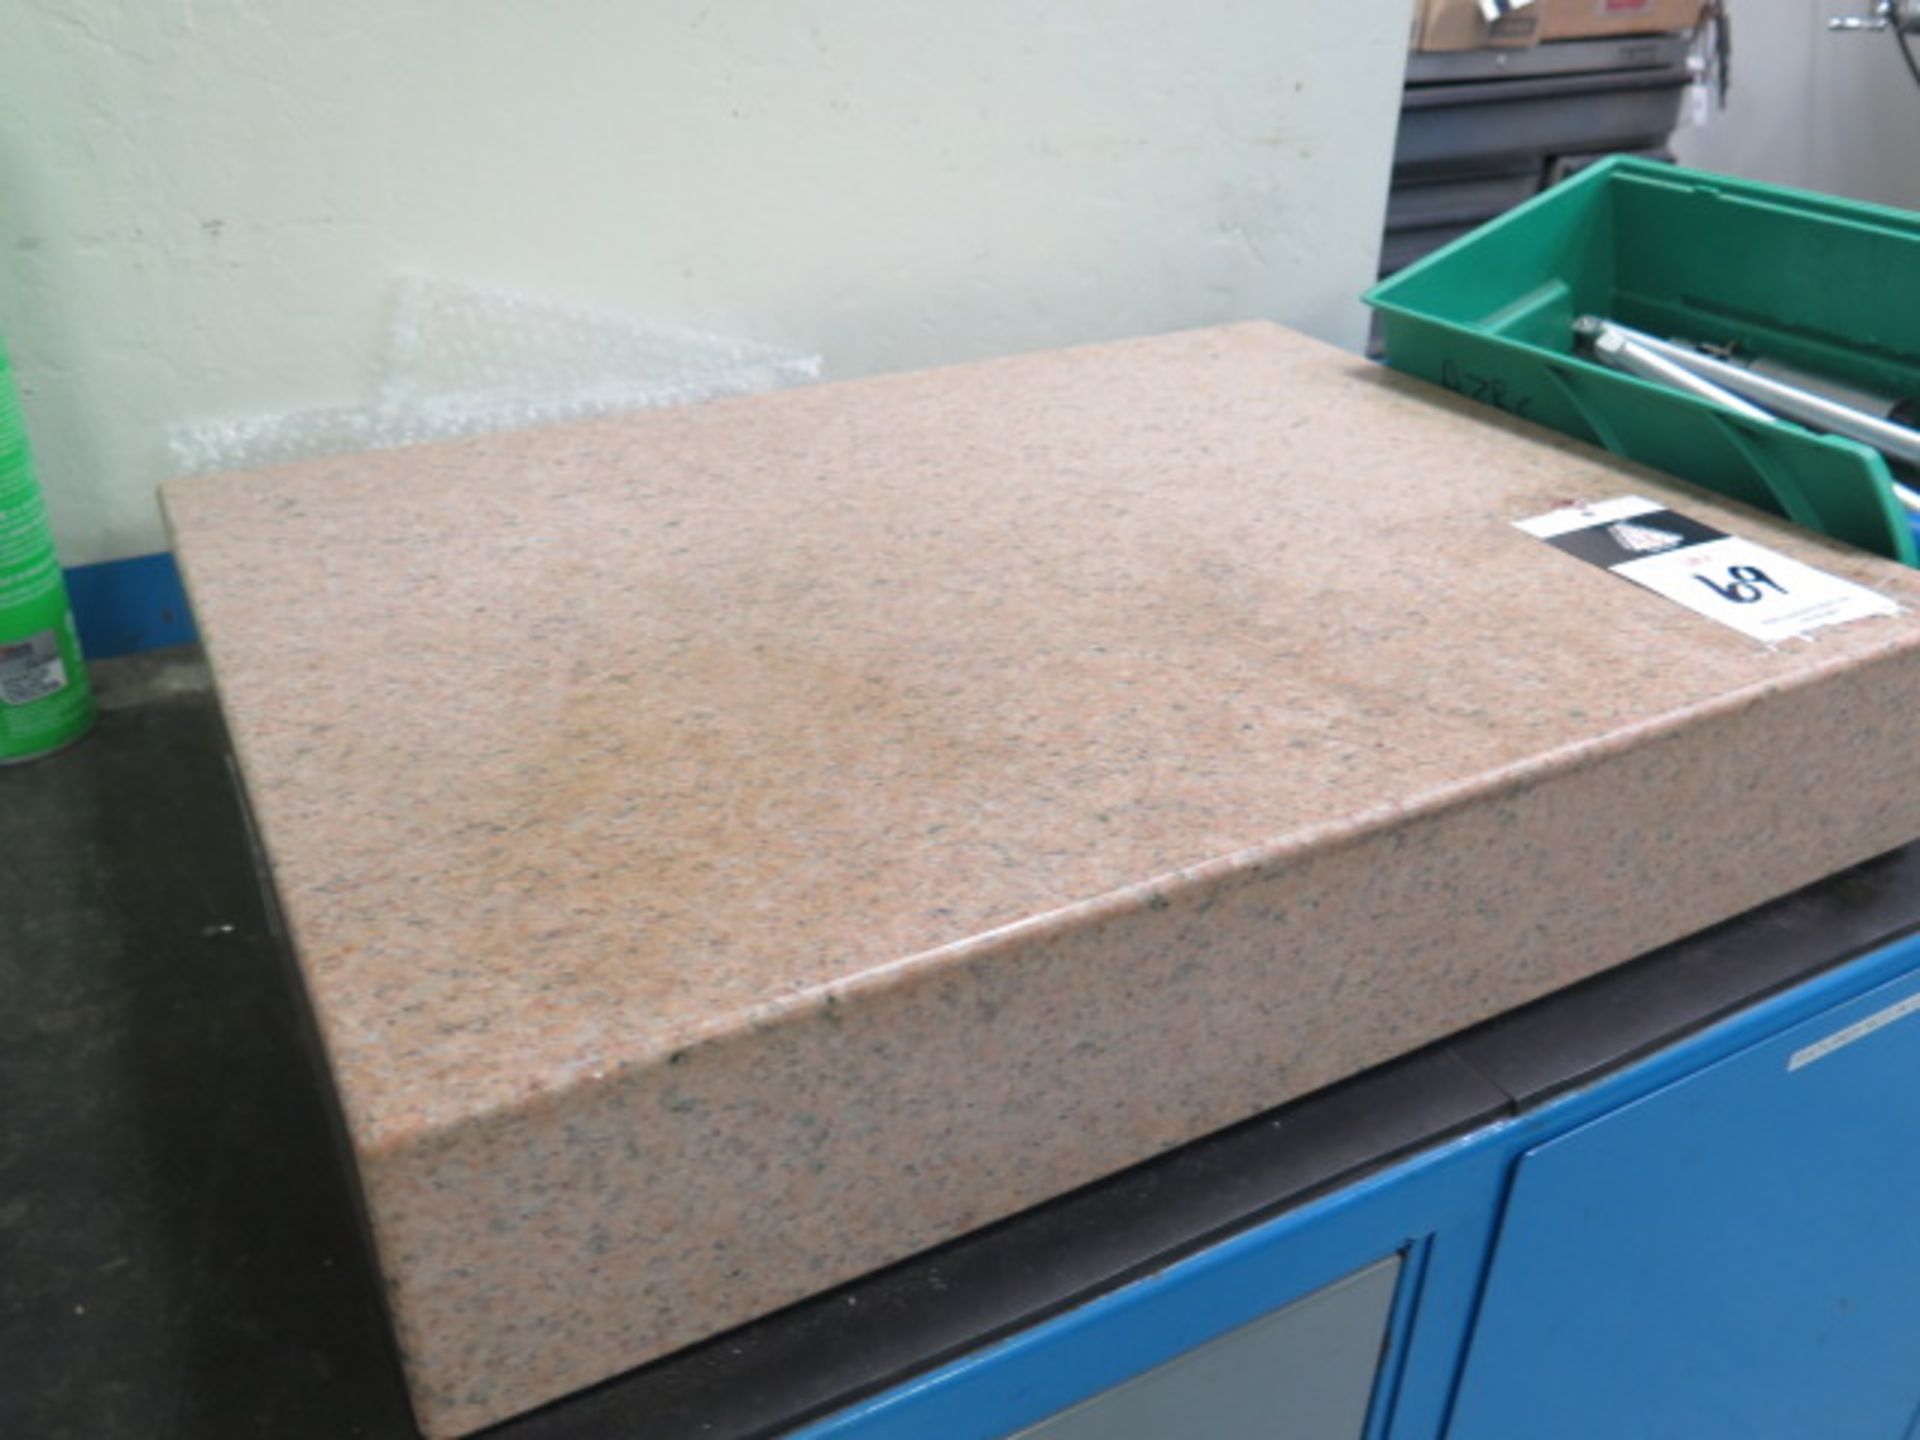 Starrett Crystal Pink 18" x 24" x 4" Granite Surface Plate (SOLD AS-IS - NO WARRANTY) - Image 2 of 5